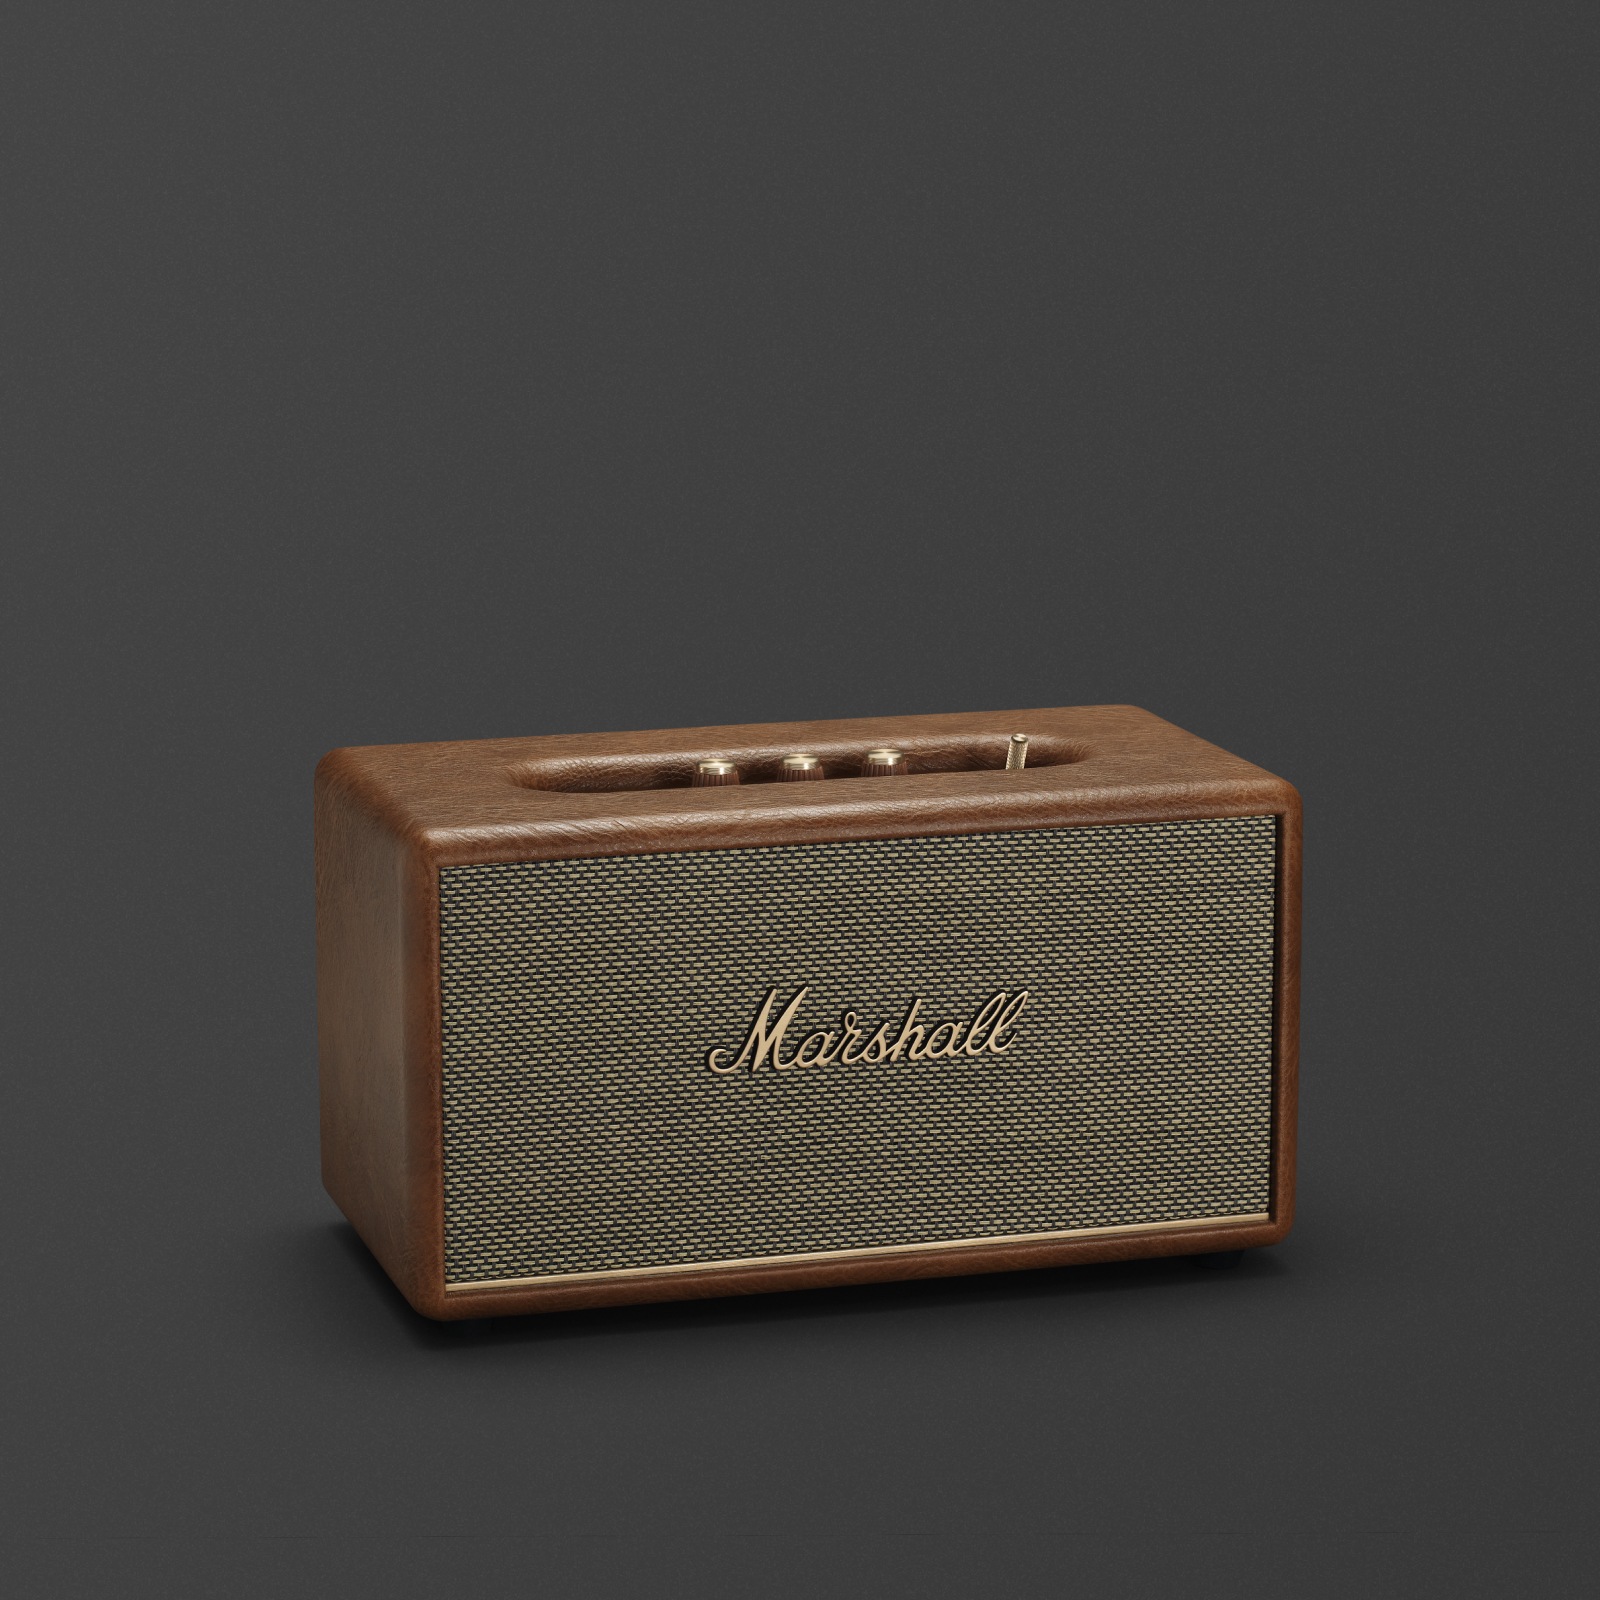 The Marshall Stanmore III Brown speaker is shown on a grey background.